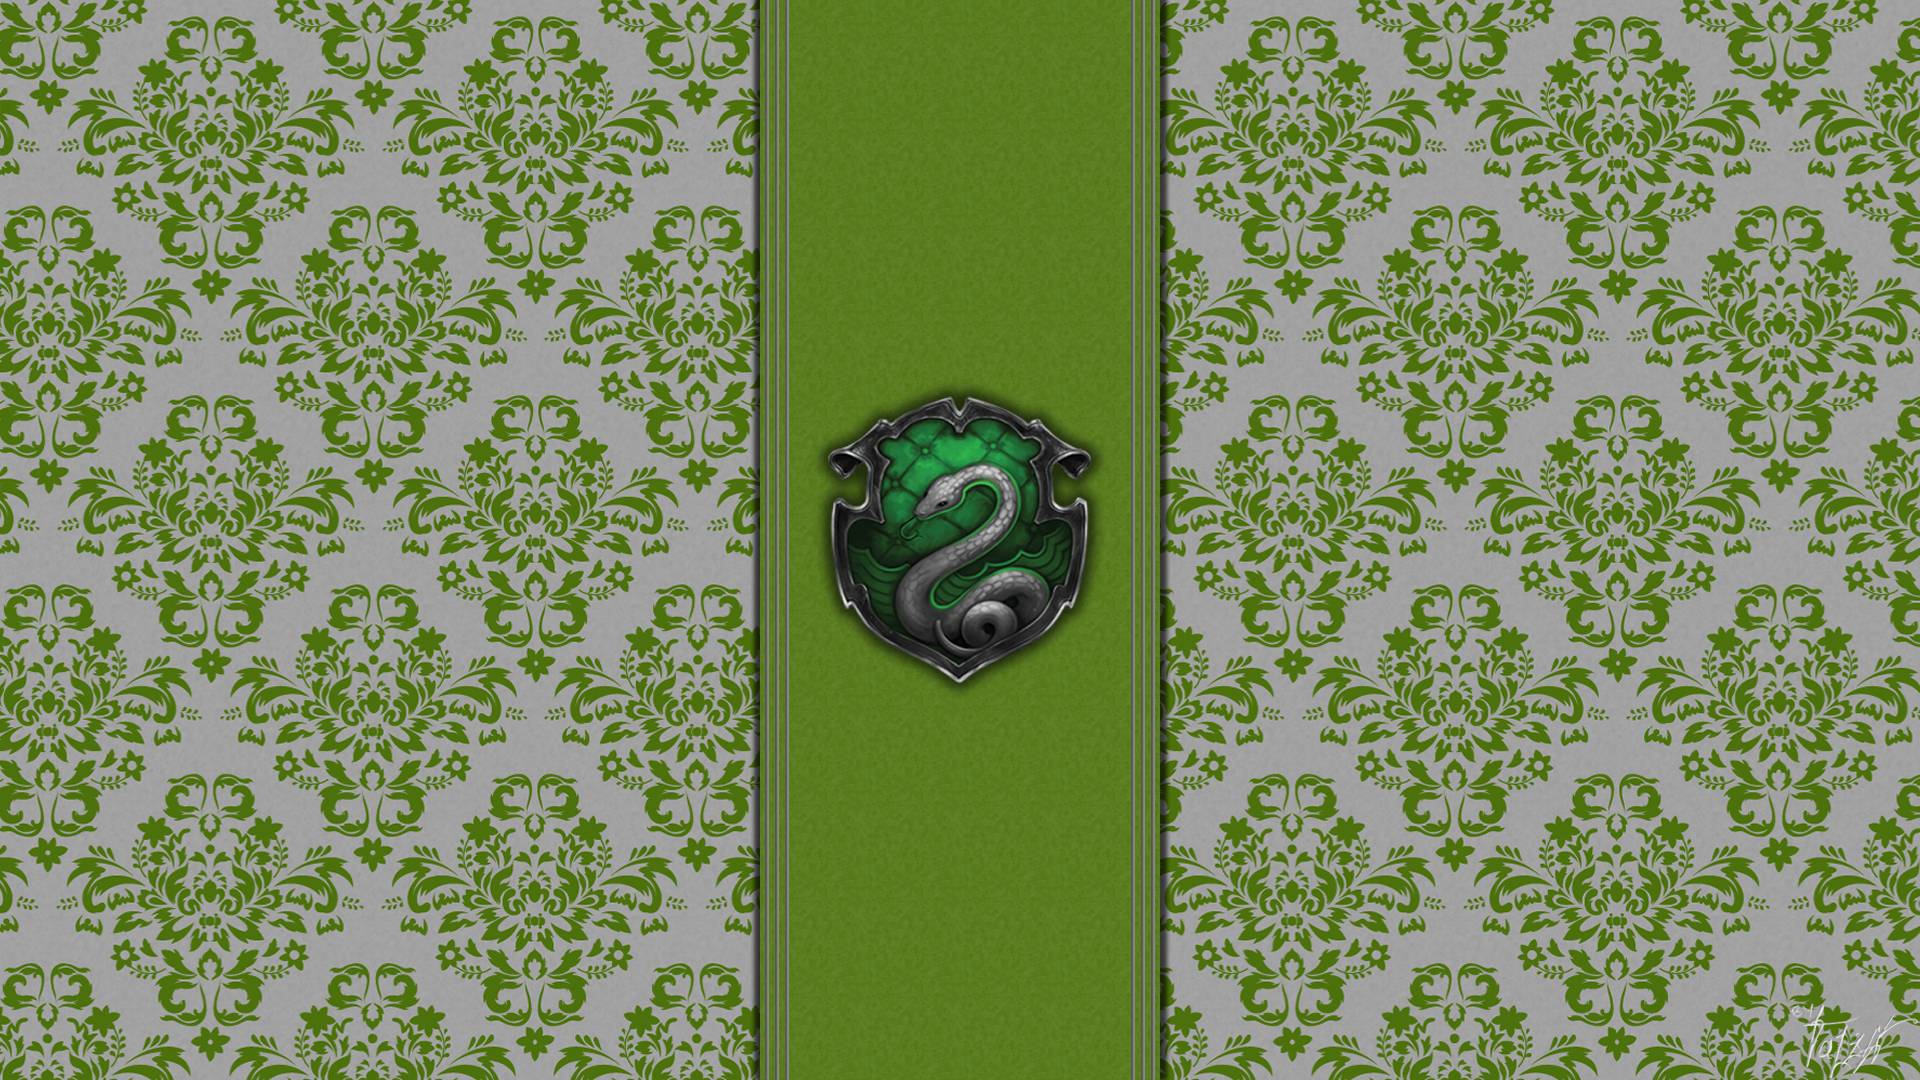 Wallpapers for all the Slytherins